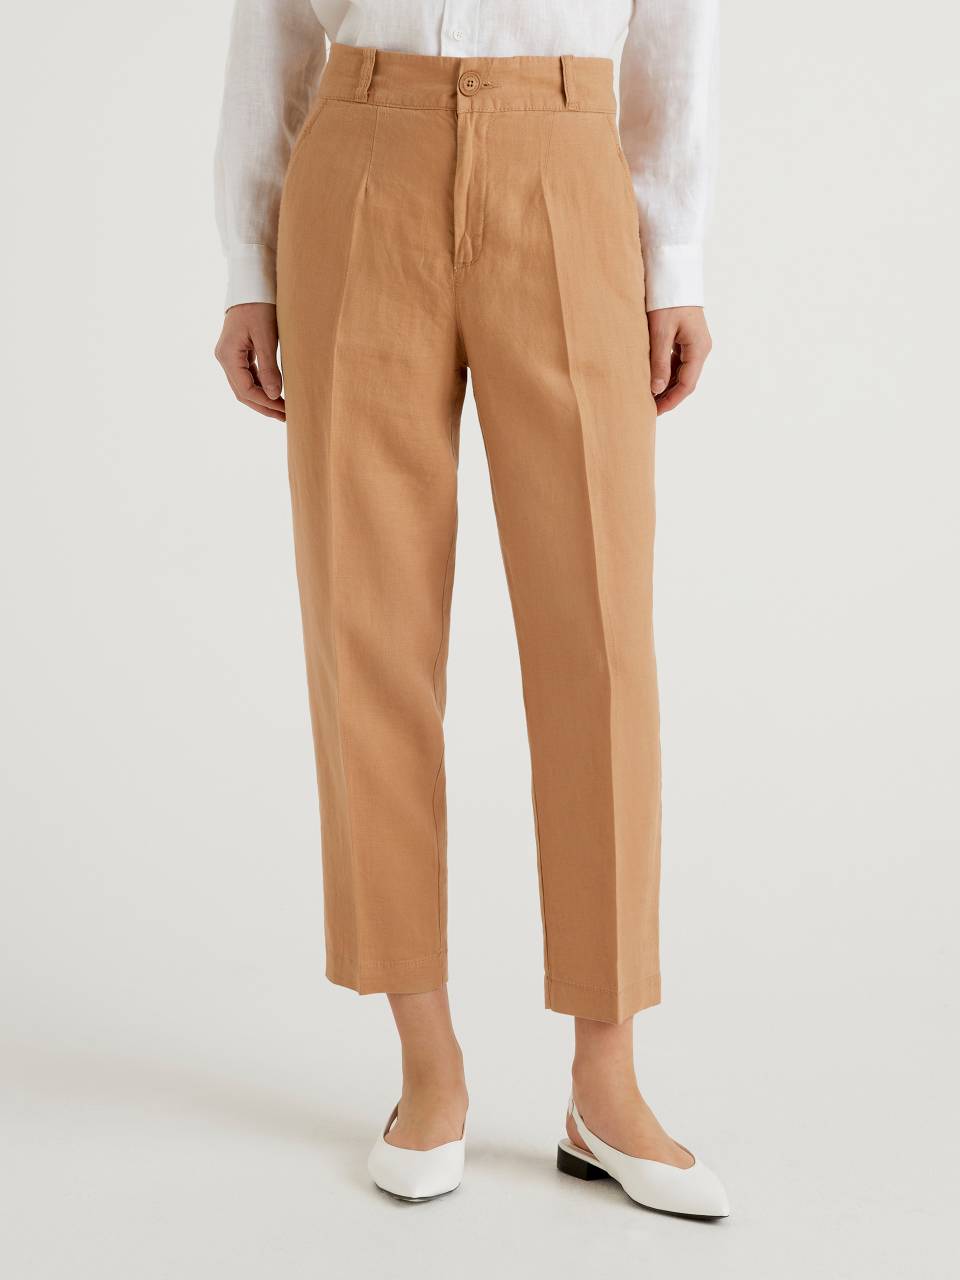 United Colors Of Benetton Trousers and Pants  Buy United Colors Of Benetton  Ladies Pastel Blue Linen Pants Online  Nykaa Fashion